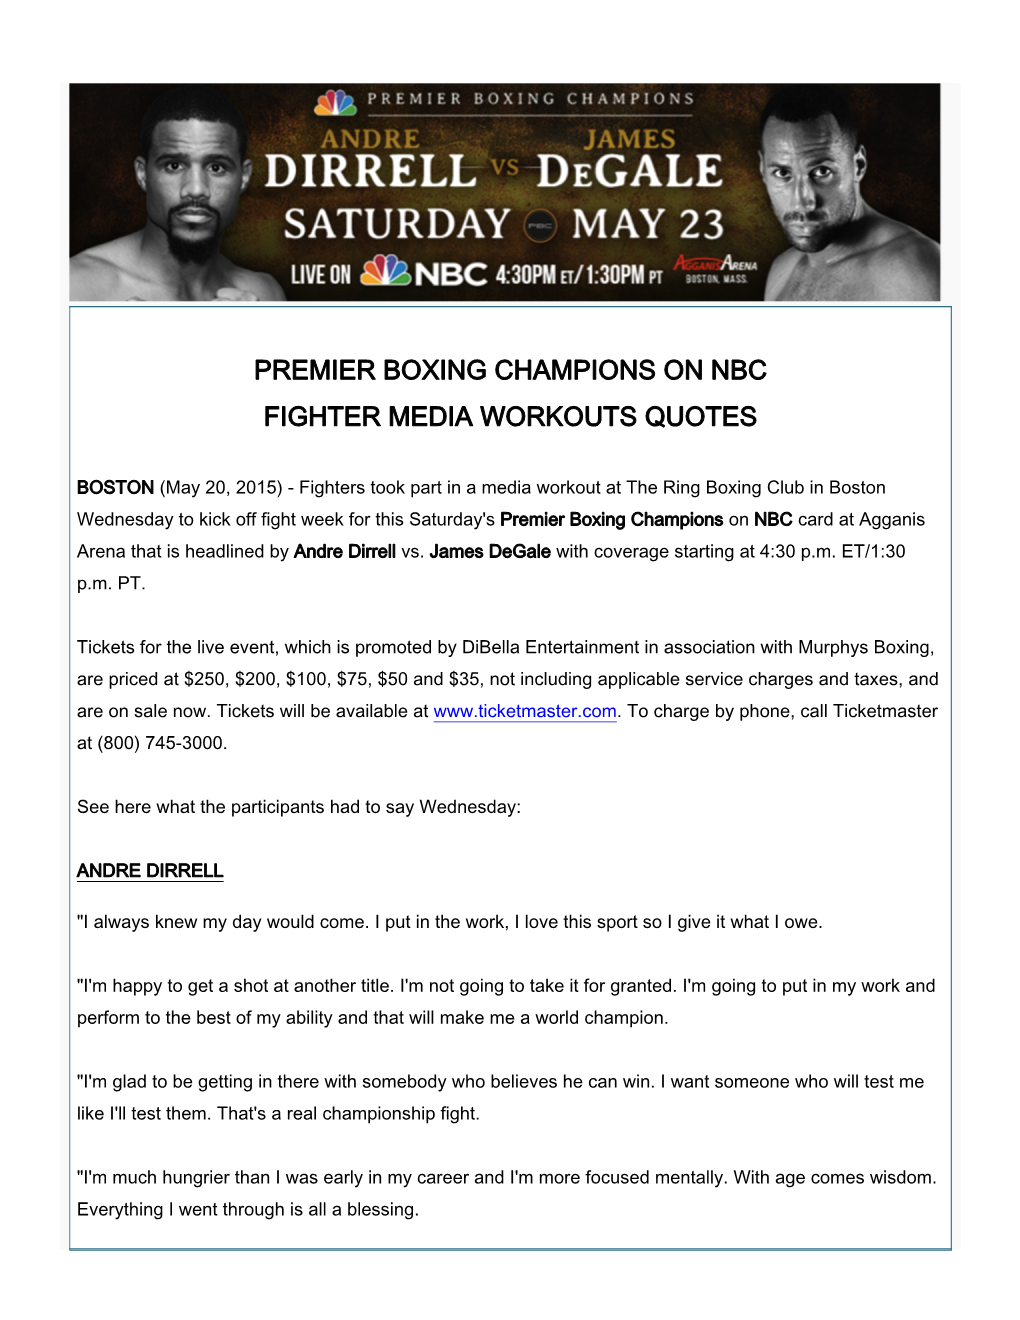 Premier Boxing Champions on Nbc Fighter Media Workouts Quotes